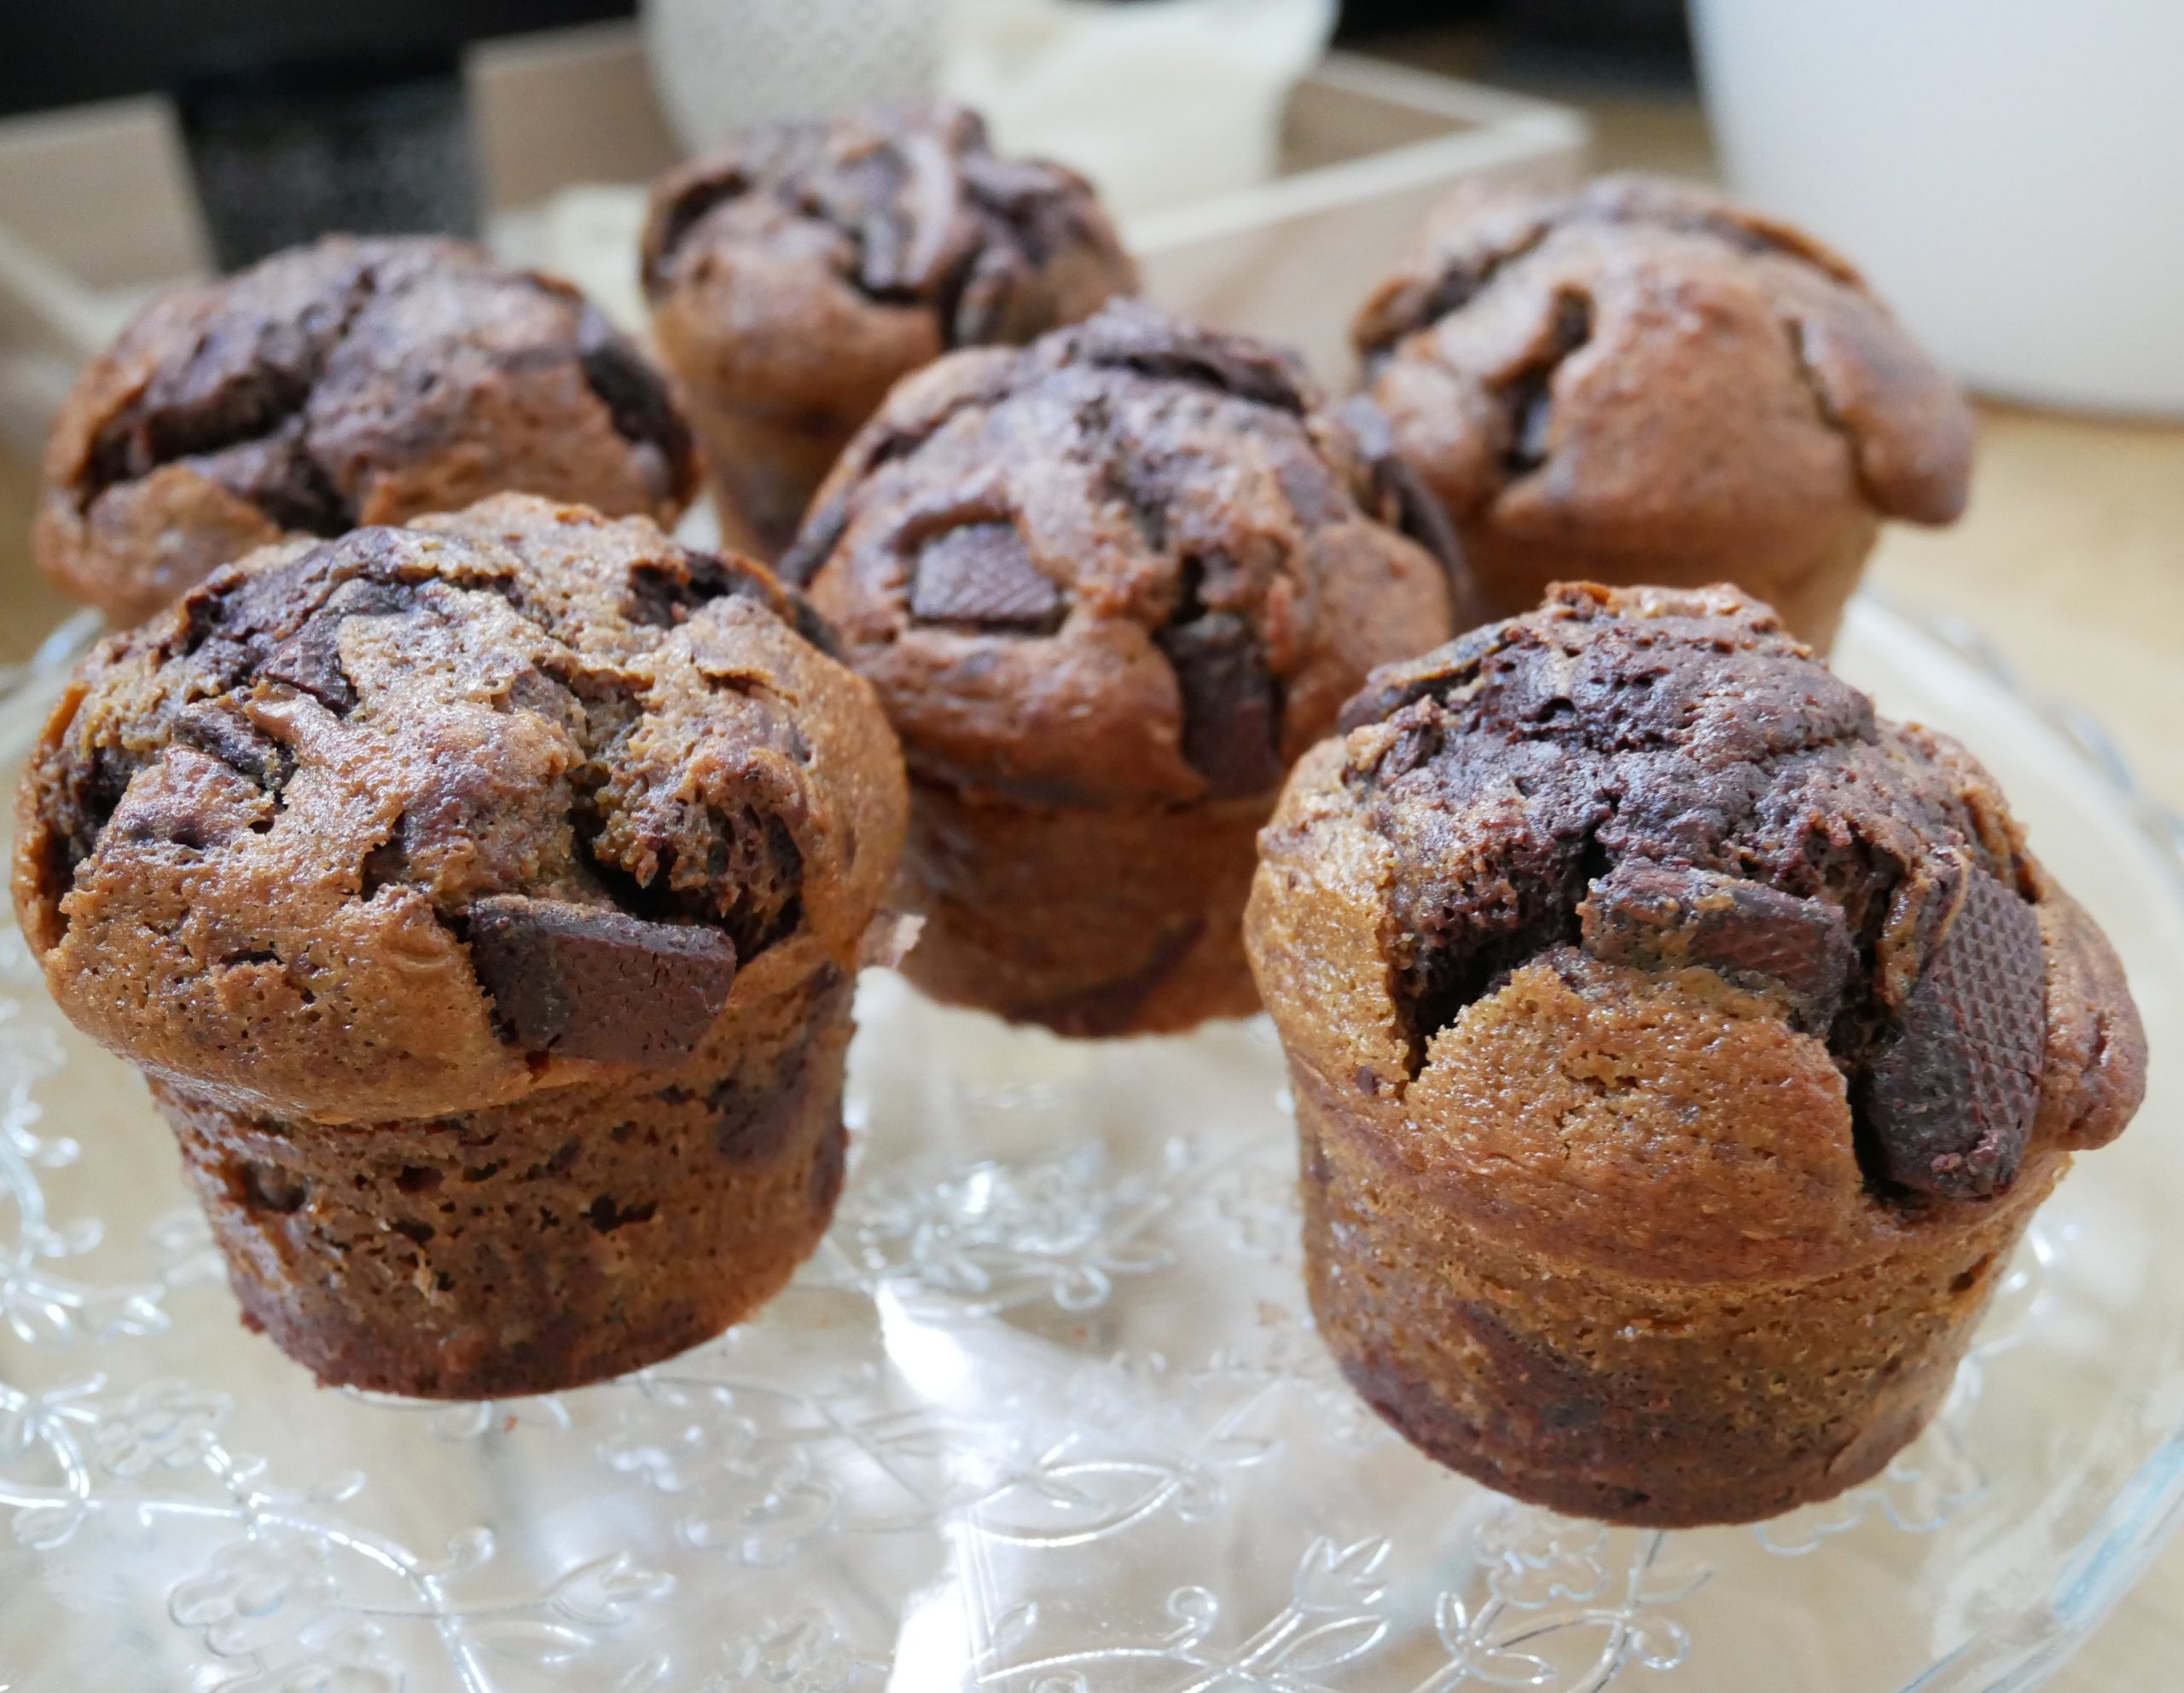 You are currently viewing Muffins au chocolat et café ou chococcino